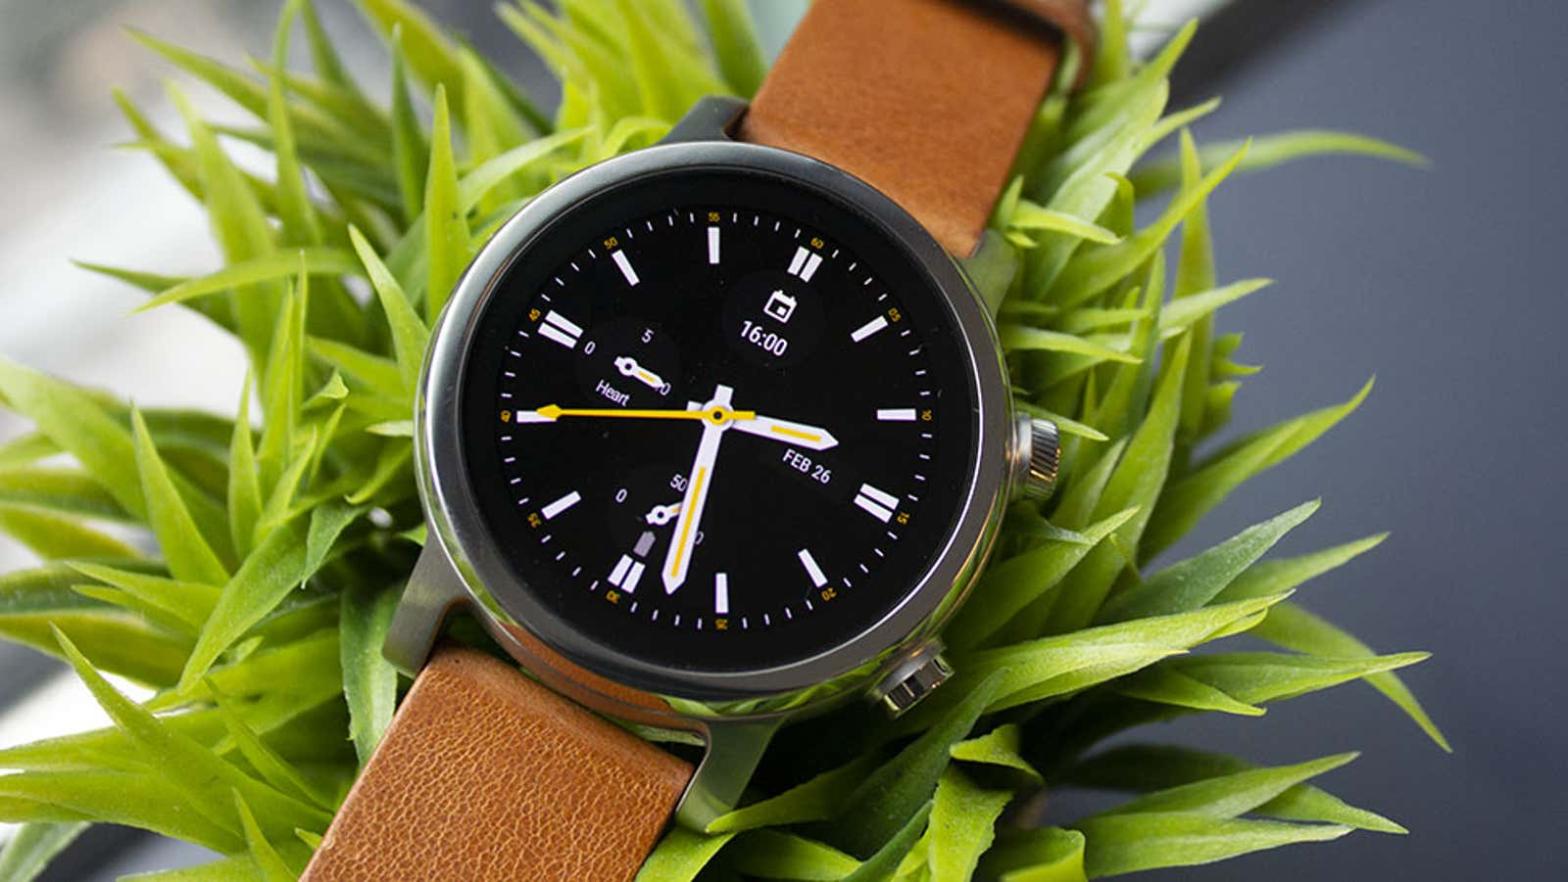 The Moto360 smartwatch is one of many that run on Snapdragon Wear 3100 (Photo: Victoria Song/Gizmodo)